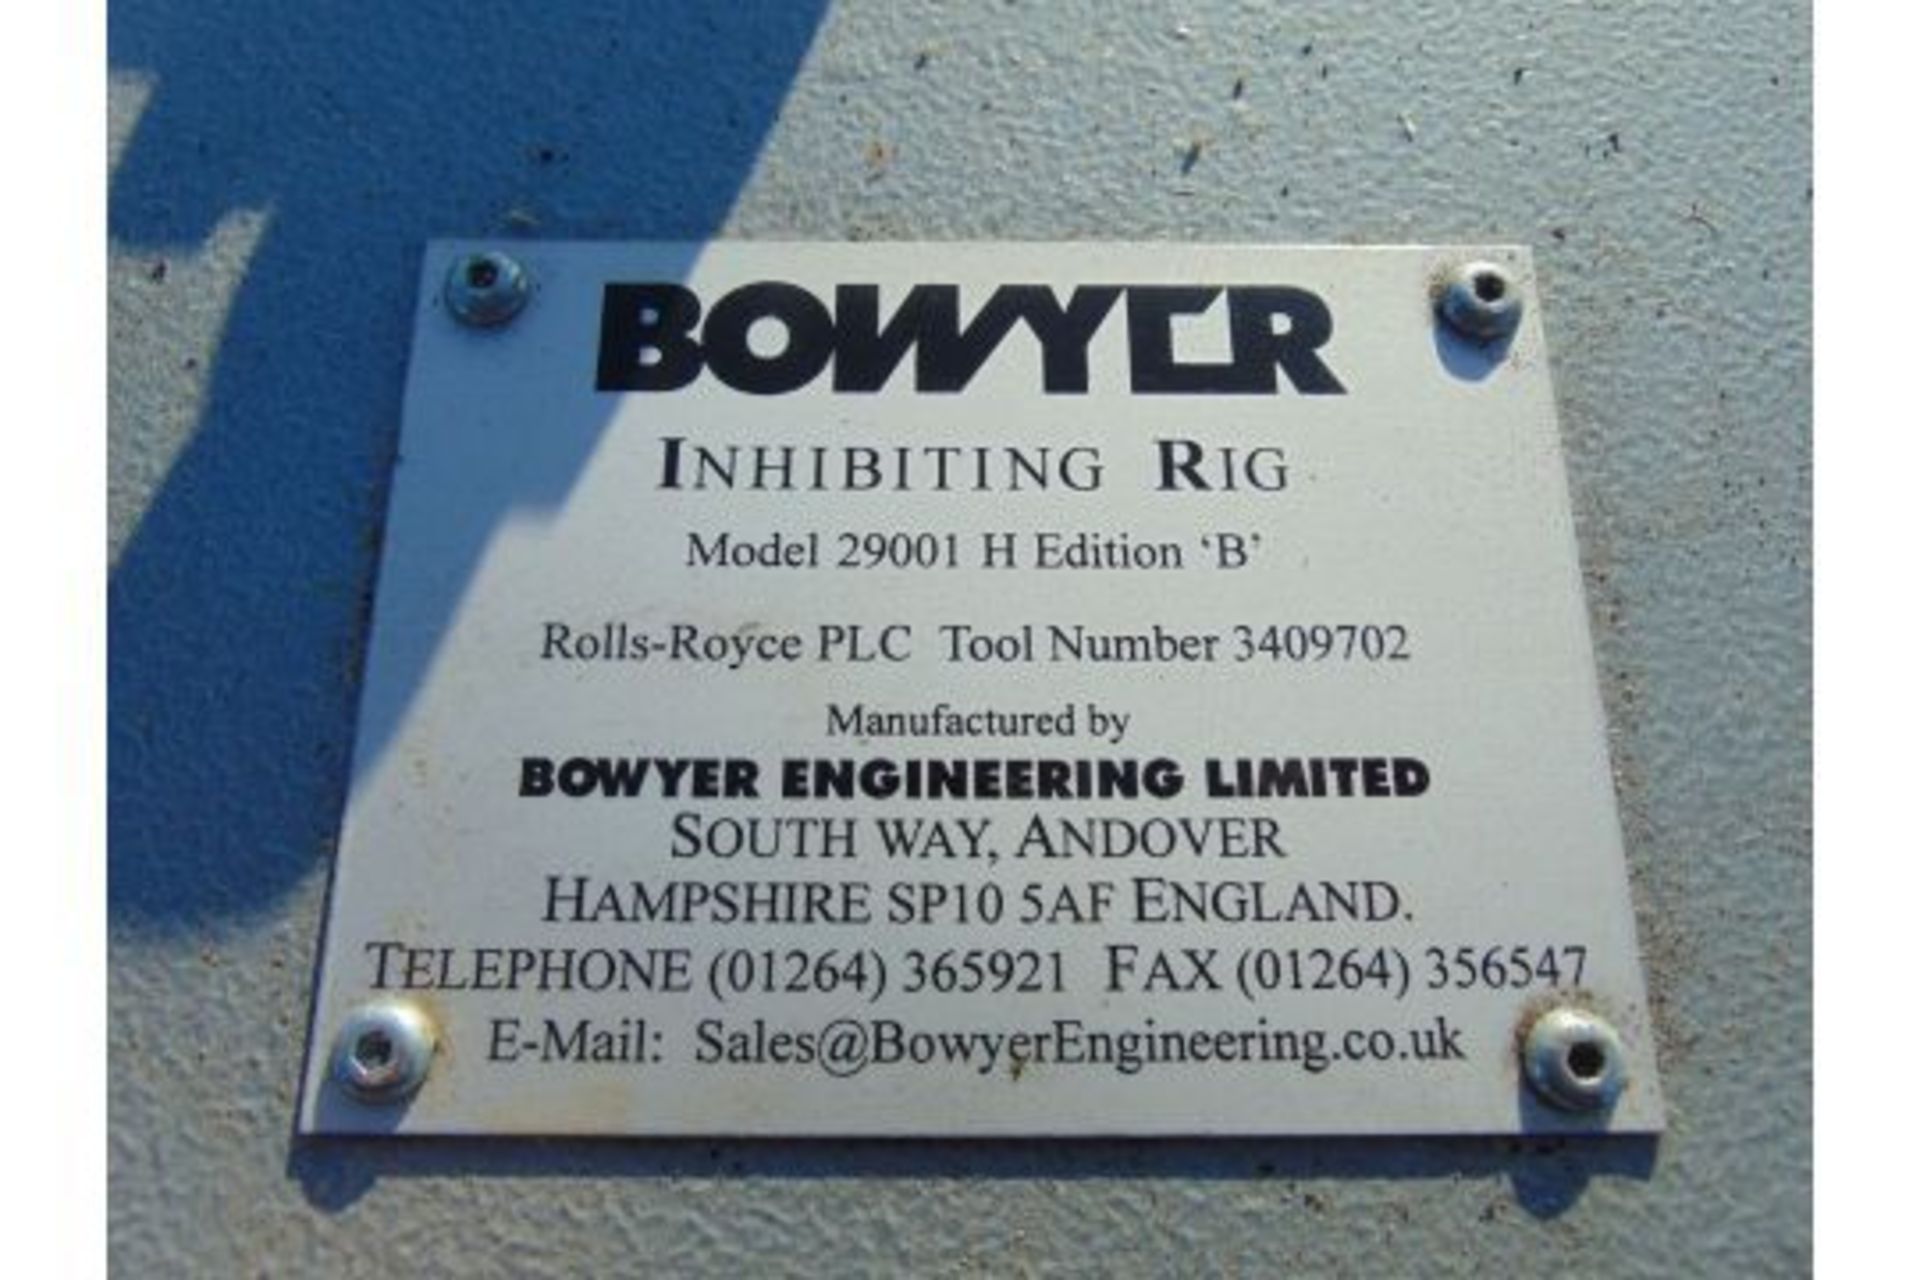 Unissued Bowyer 29001 H edition ‘B’ fuel line inhibiting rig - Image 11 of 12